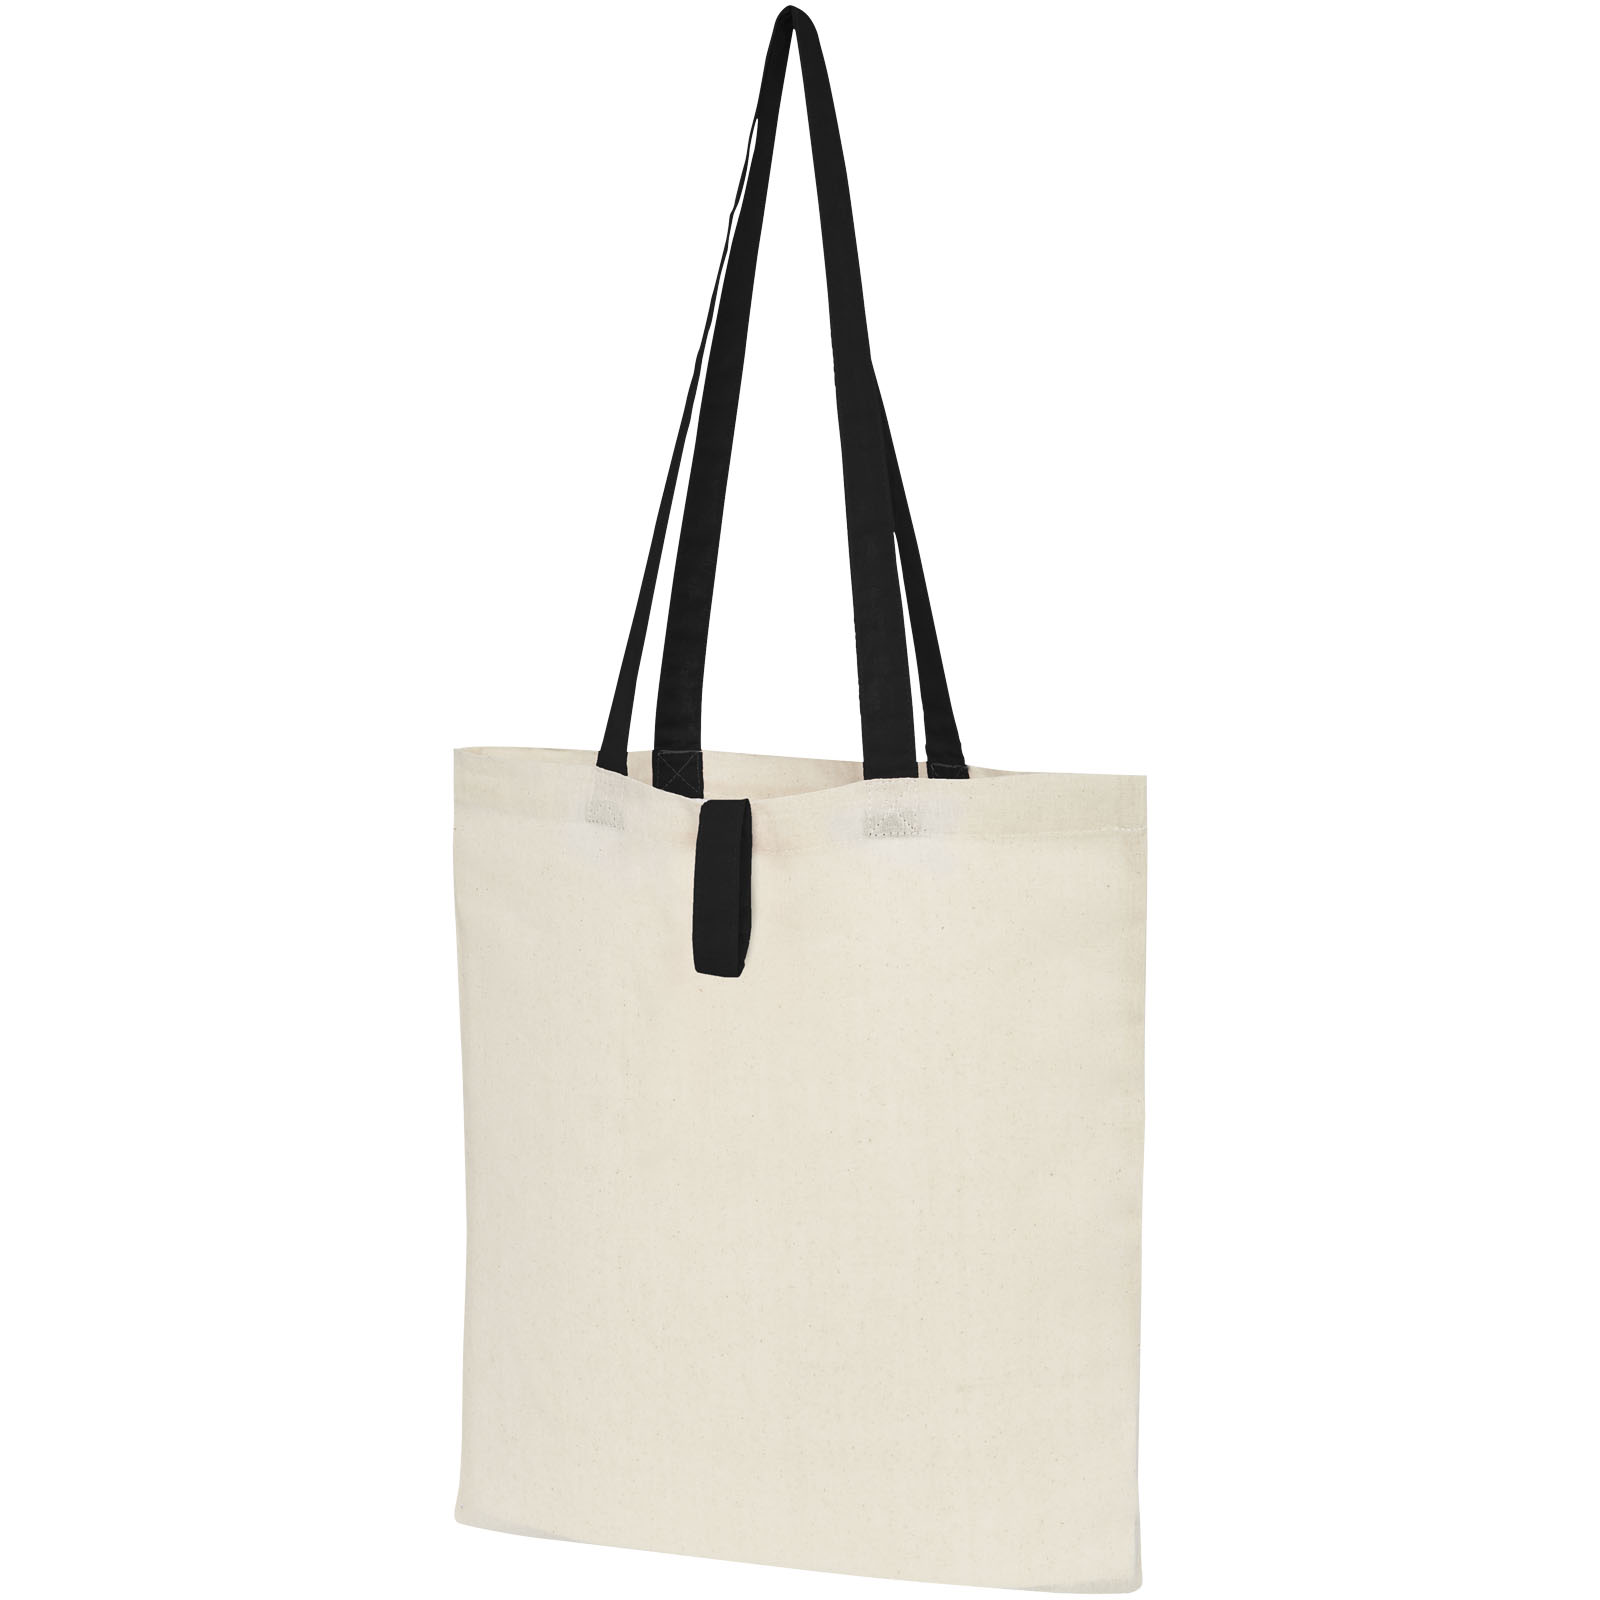 Advertising Shopping & Tote Bags - Nevada 100 g/m² cotton foldable tote bag 7L